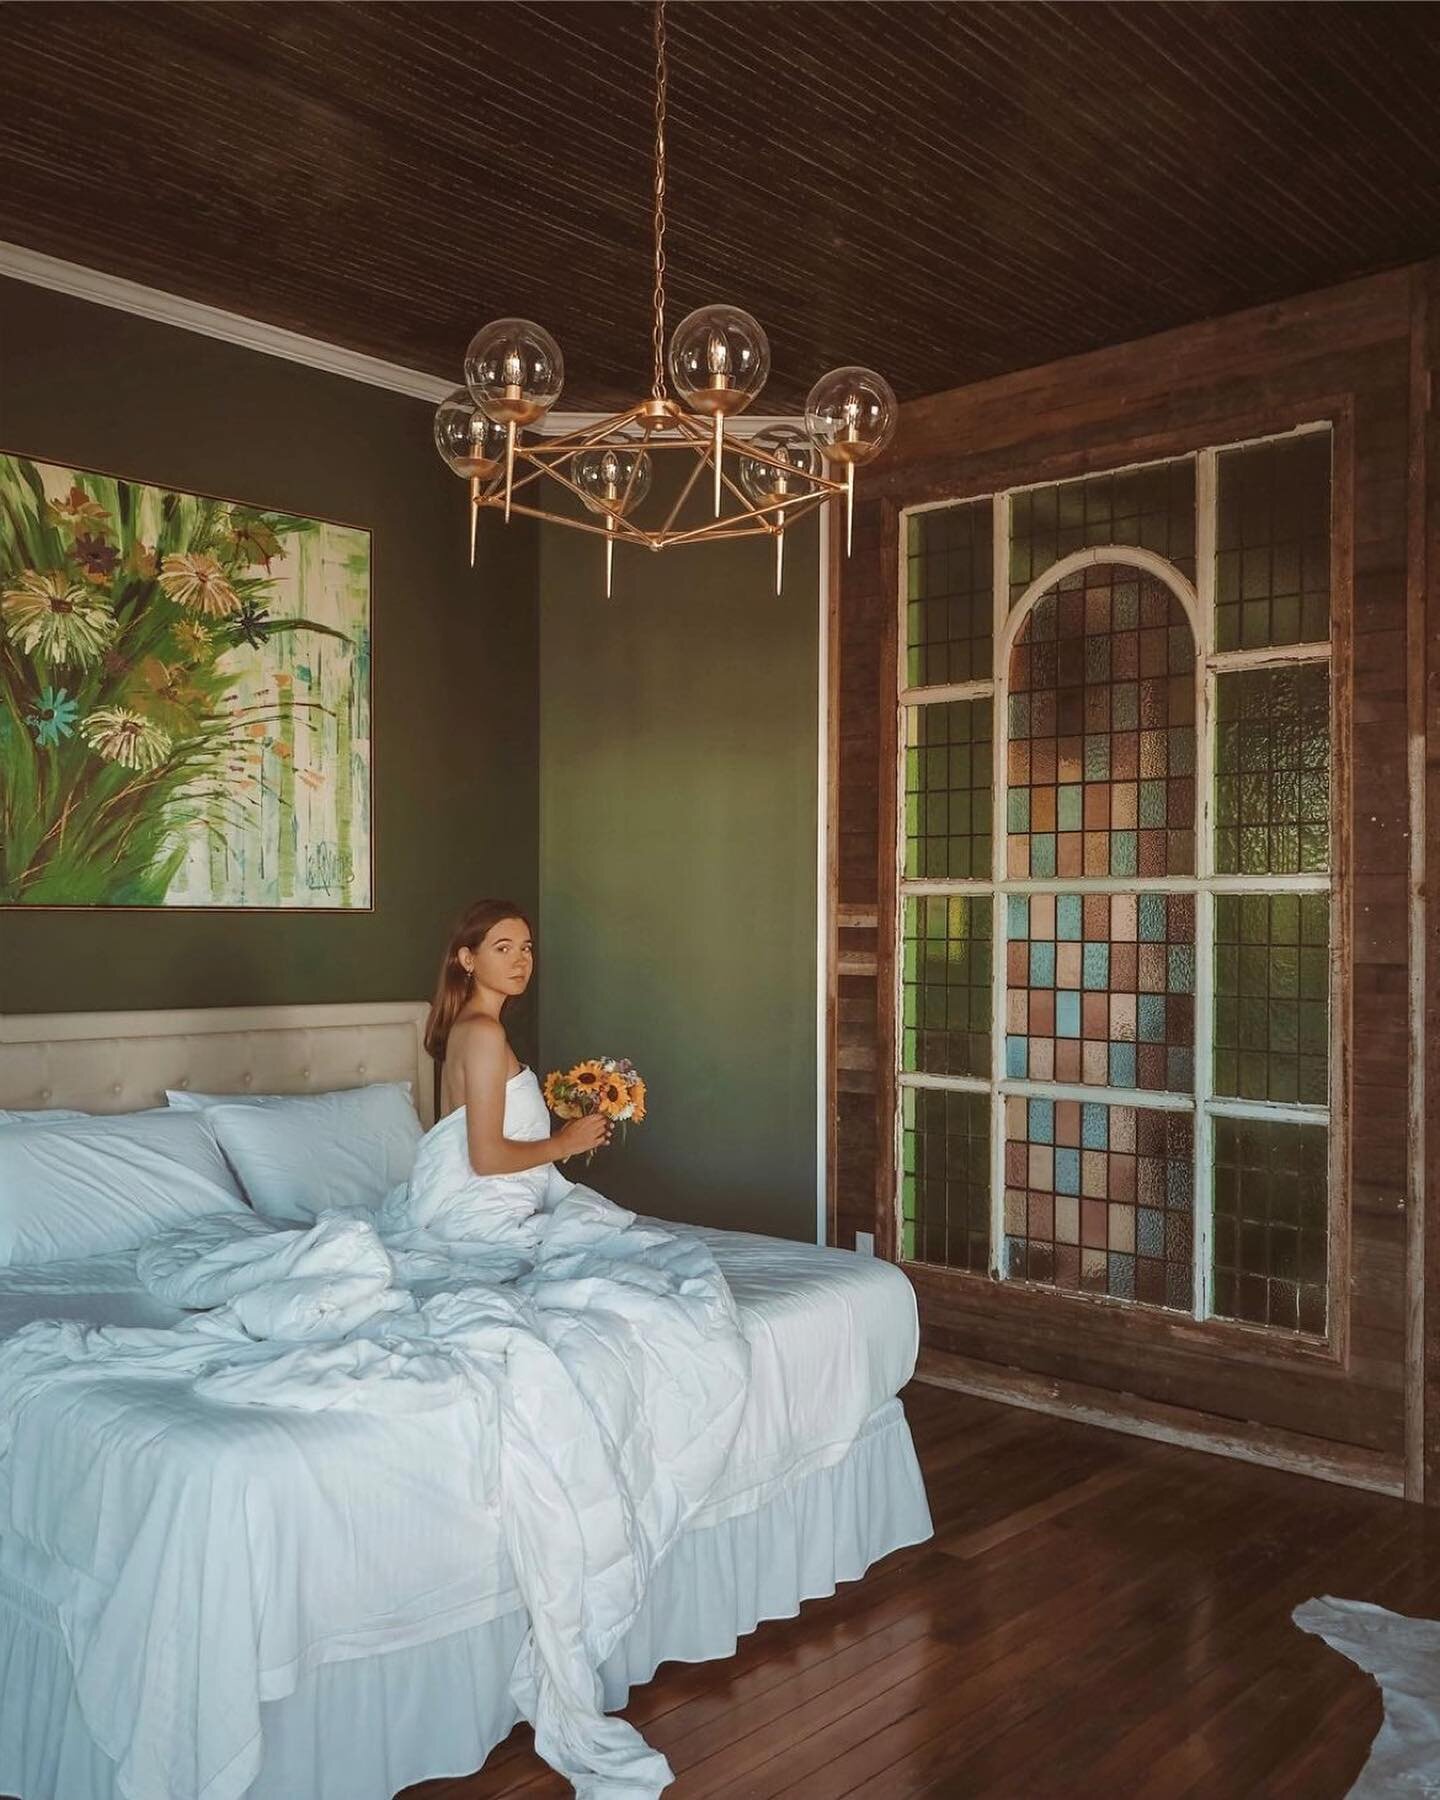 Repost from @maria_ponomaryova
&bull;
I feel like a time traveler in the heart of Bainbridge, Georgia at @thewillisparkhotel ! 

This boutique hotel, built in 1899, is the first of its kind in the region. With six uniquely styled rooms, your experien